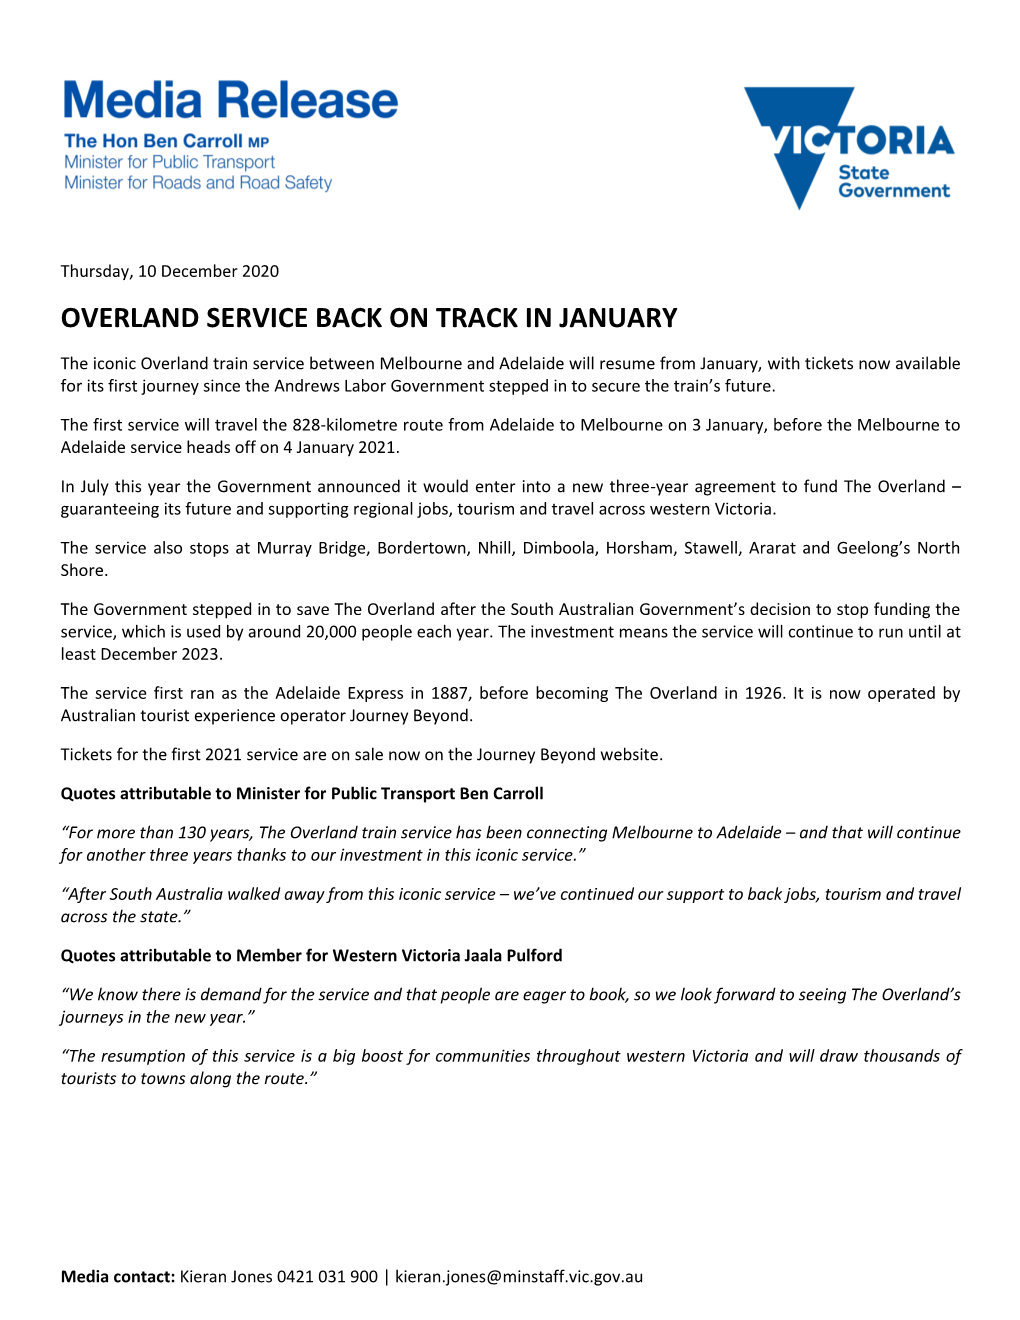 Overland Service Back on Track in January